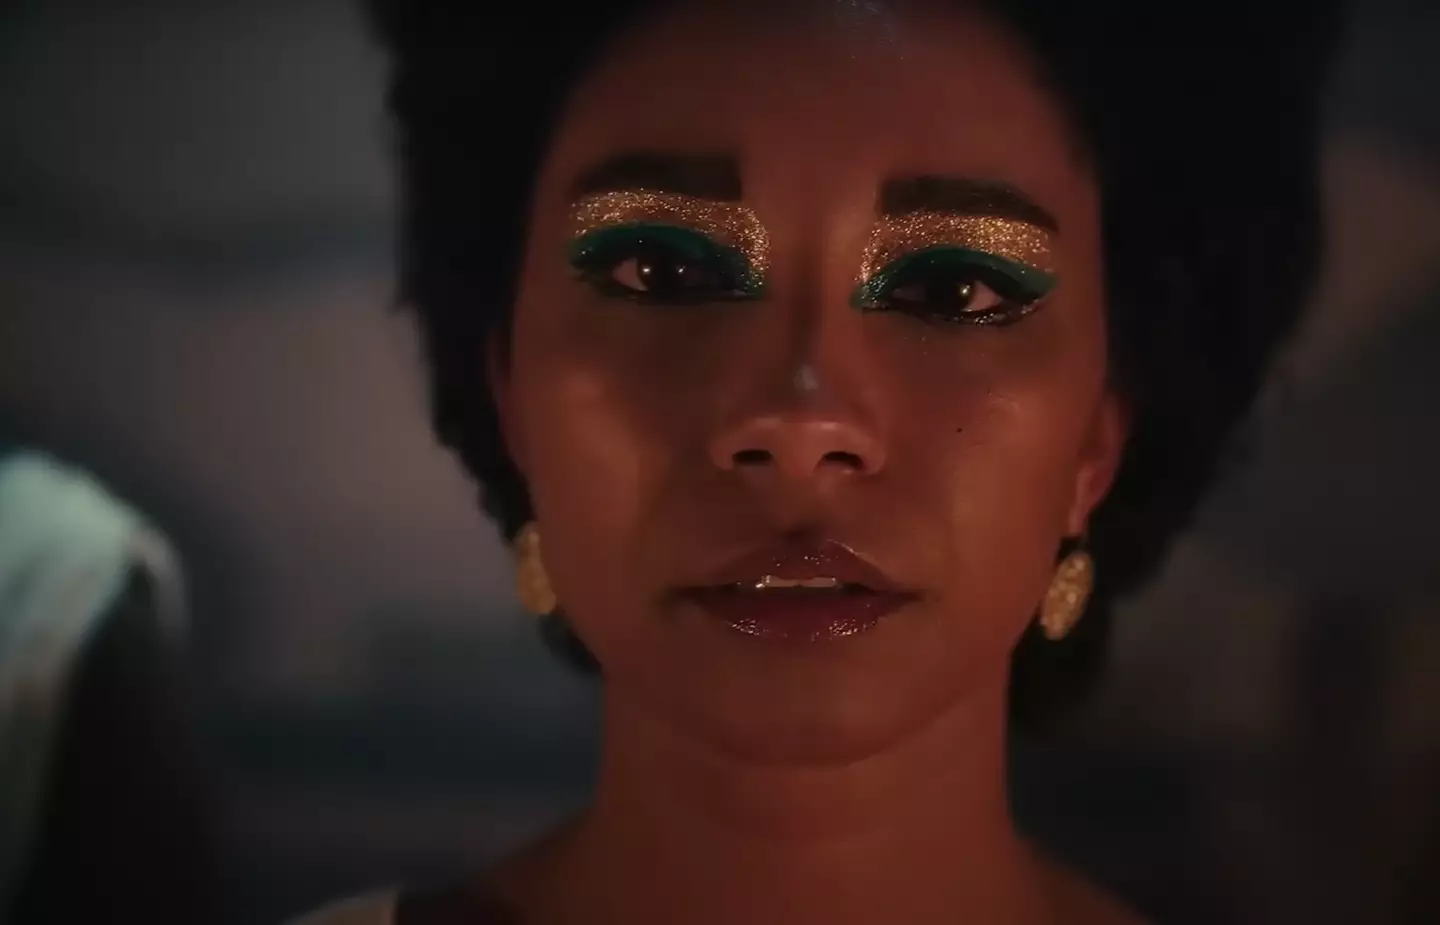 The new doc has come under fire over the depiction of Cleopatra.